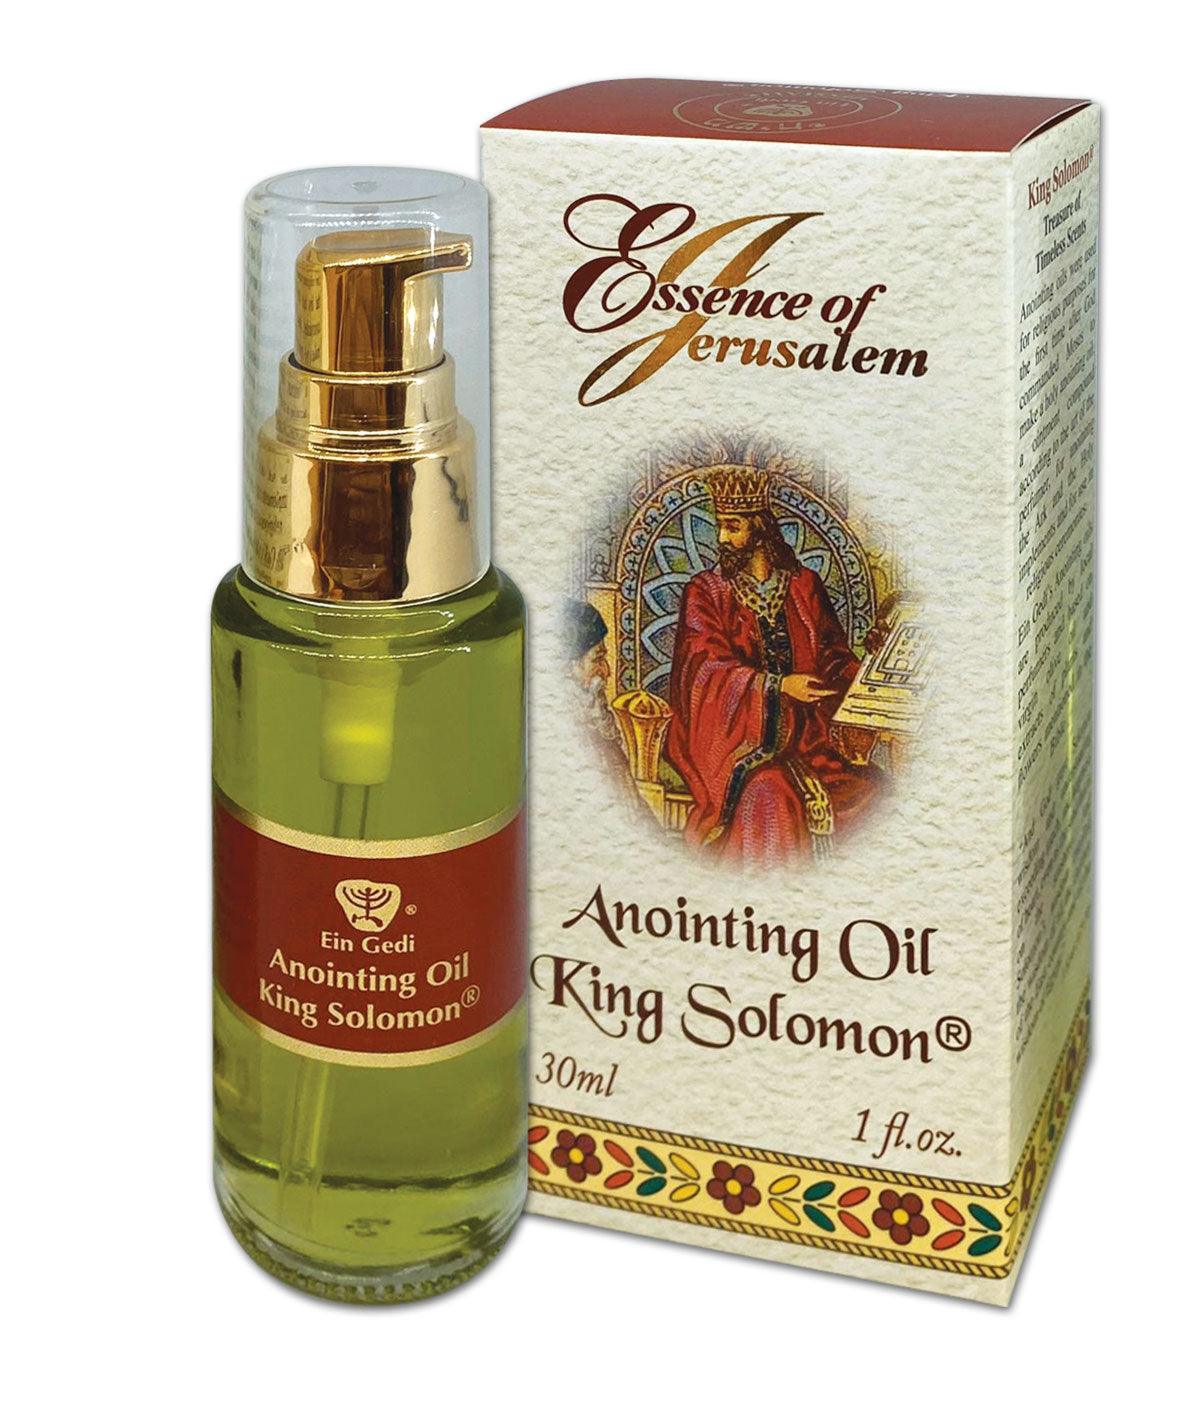 King Solomon Essence of Jerusalem Anointing Oil 30ml. From Israel - Spring Nahal